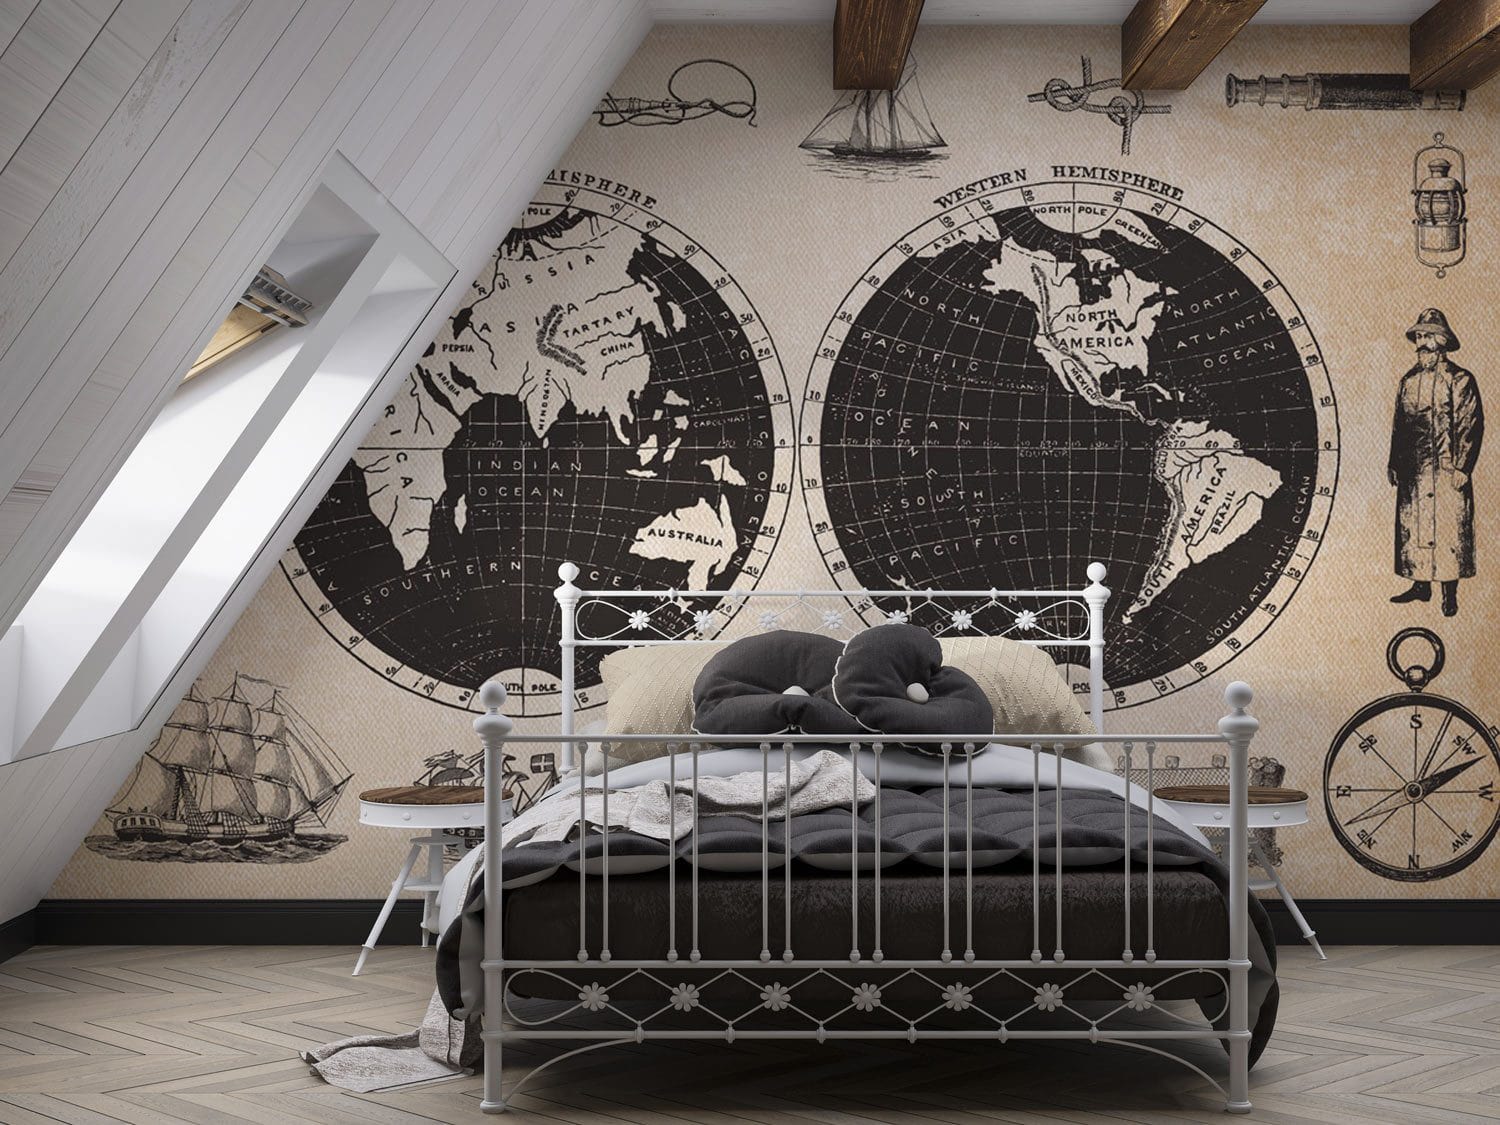 Navigation Wallpaper mural of the world map for use in decorating bedrooms